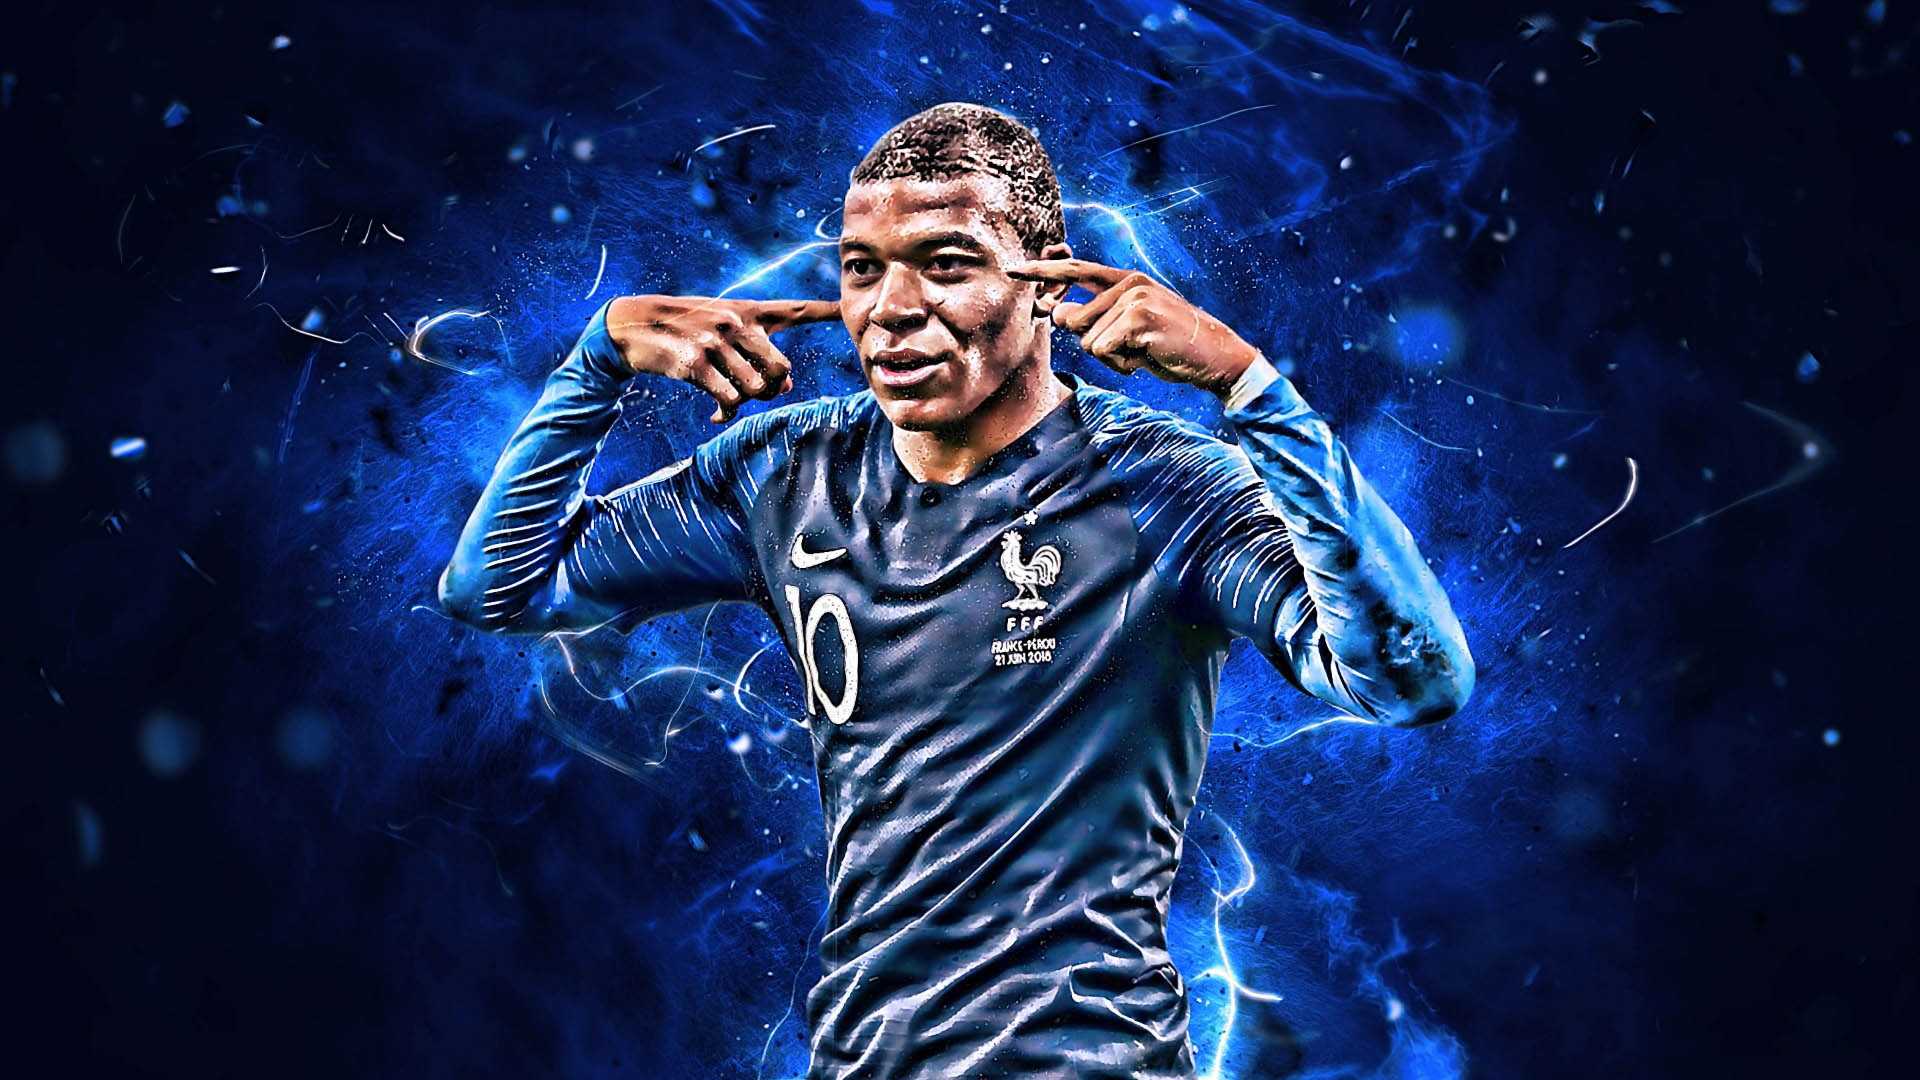 Mbappe France Wallpapers Top Free Mbappe France Backgrounds Wallpaperaccess